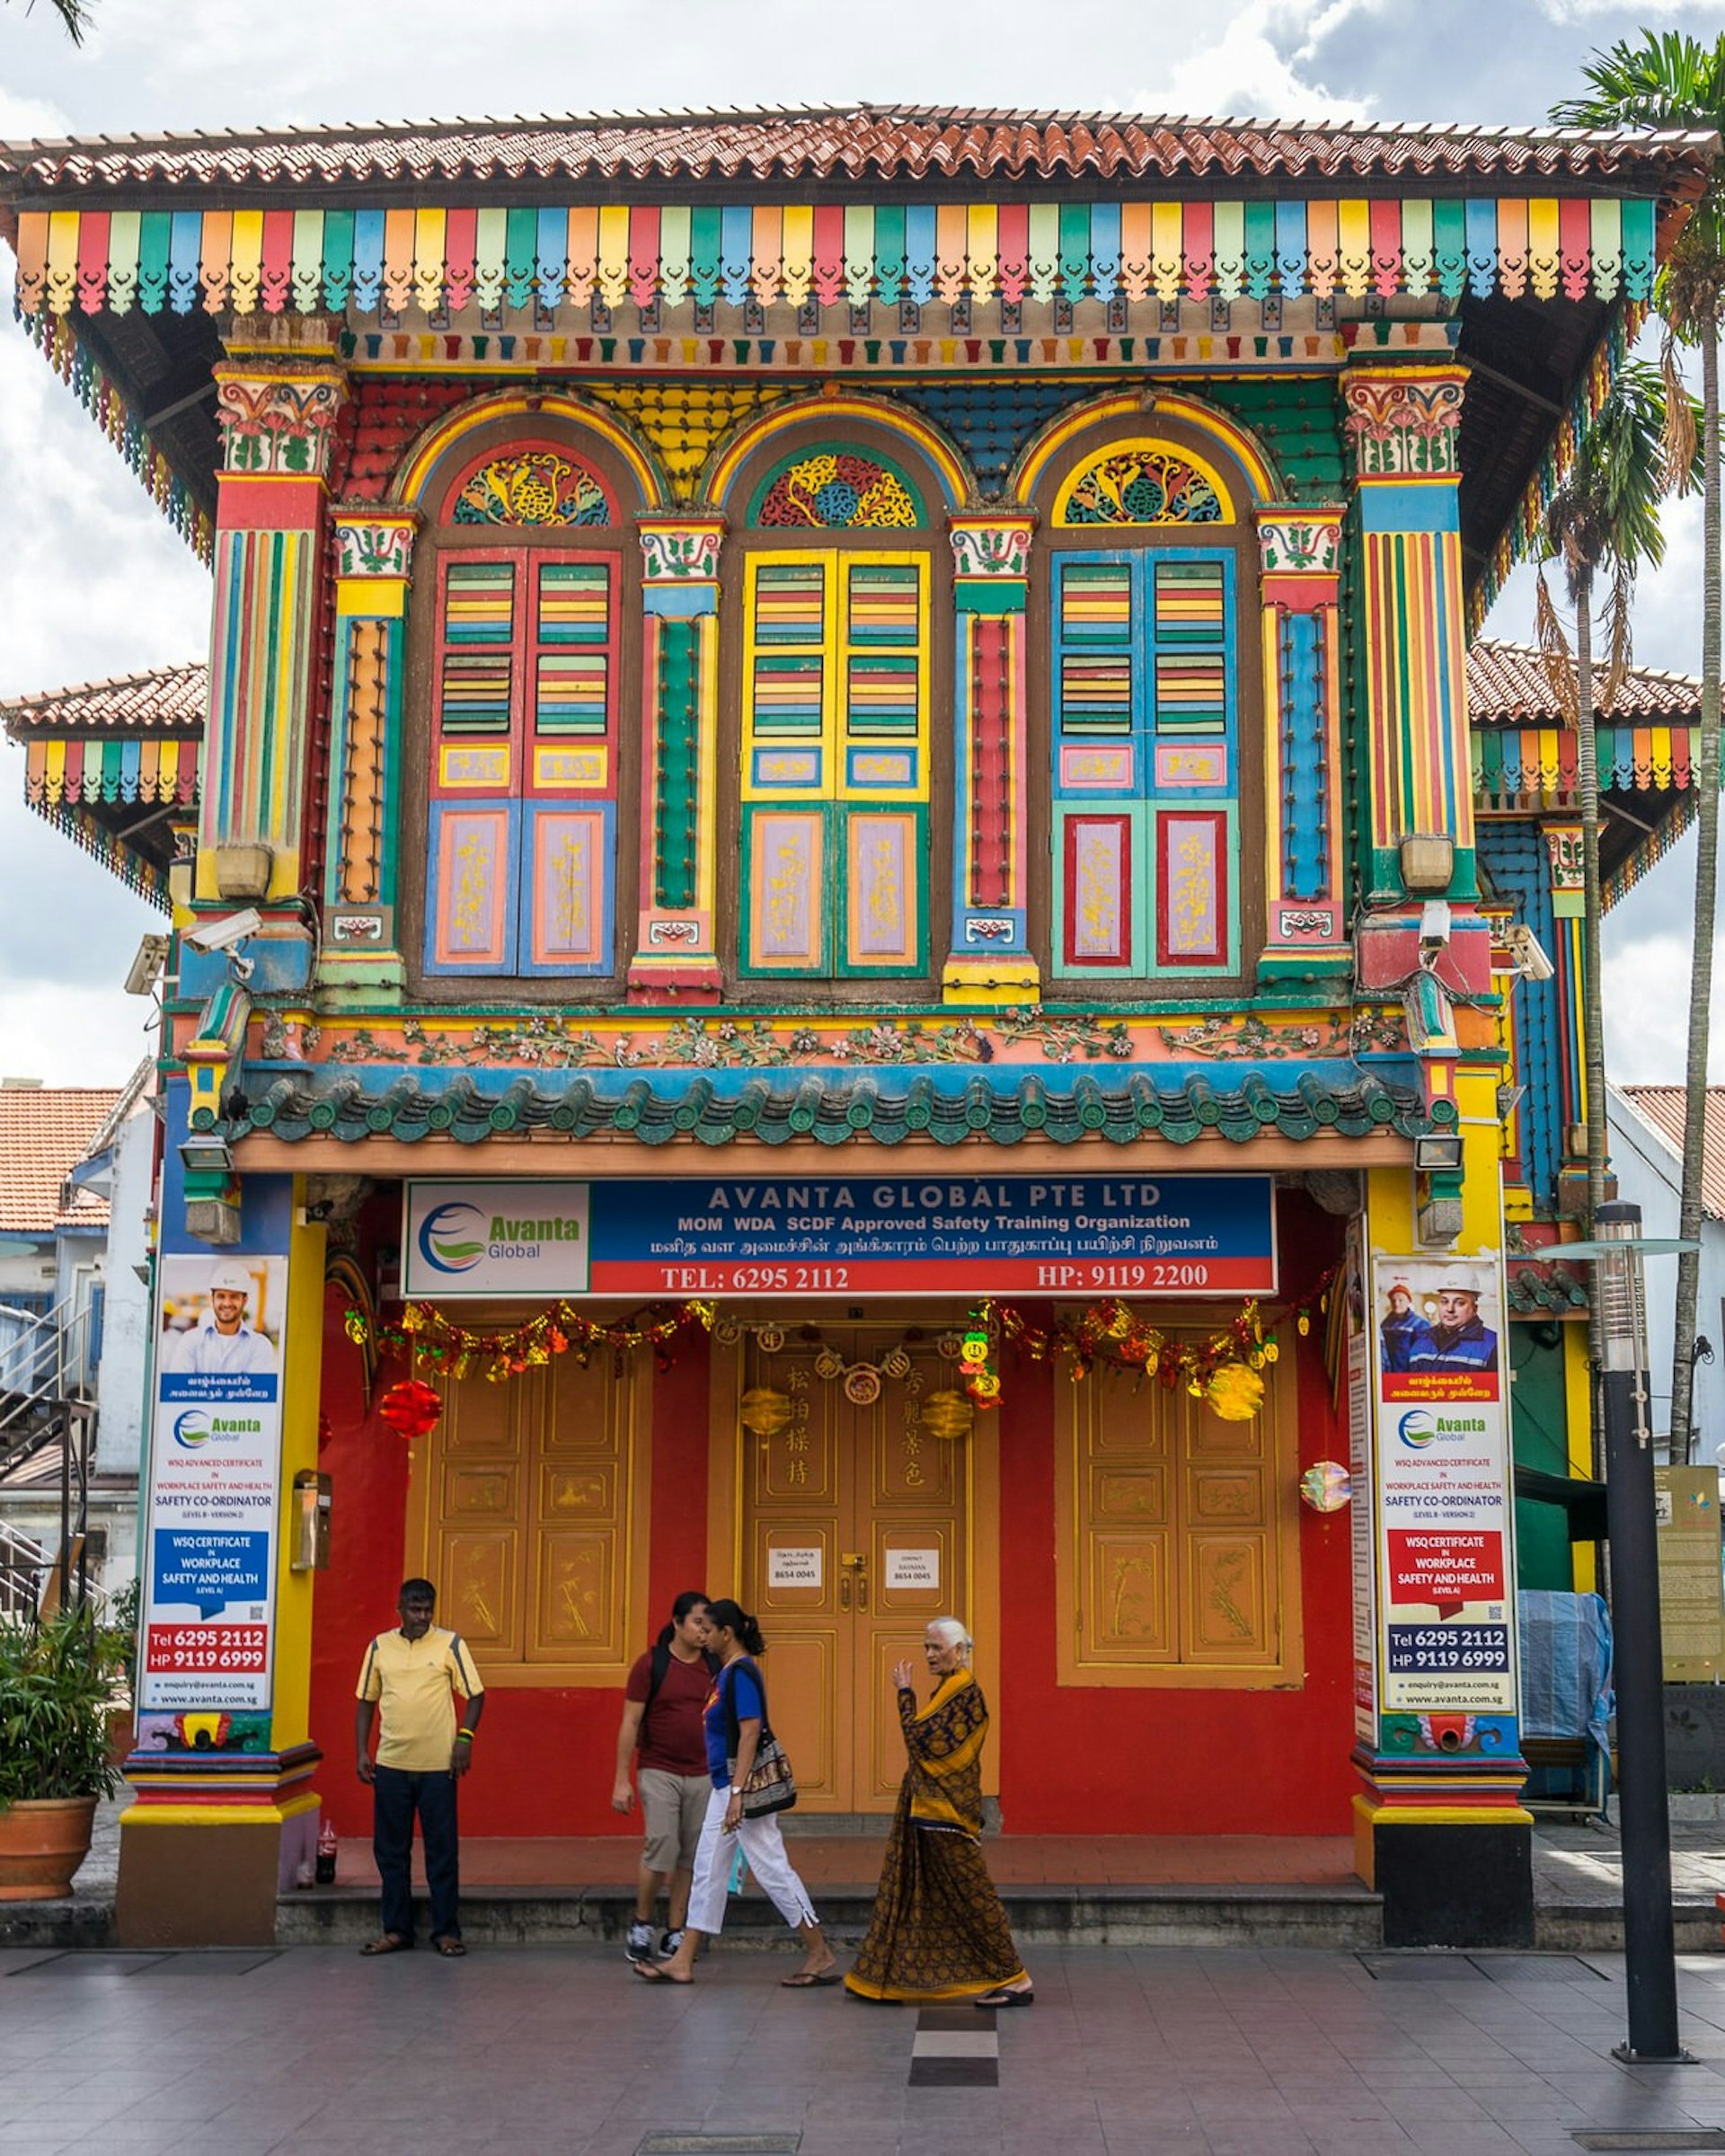 A brightly painted, multicoloured building in Little India, Singapore © Alex Cimbal / Shutterstock